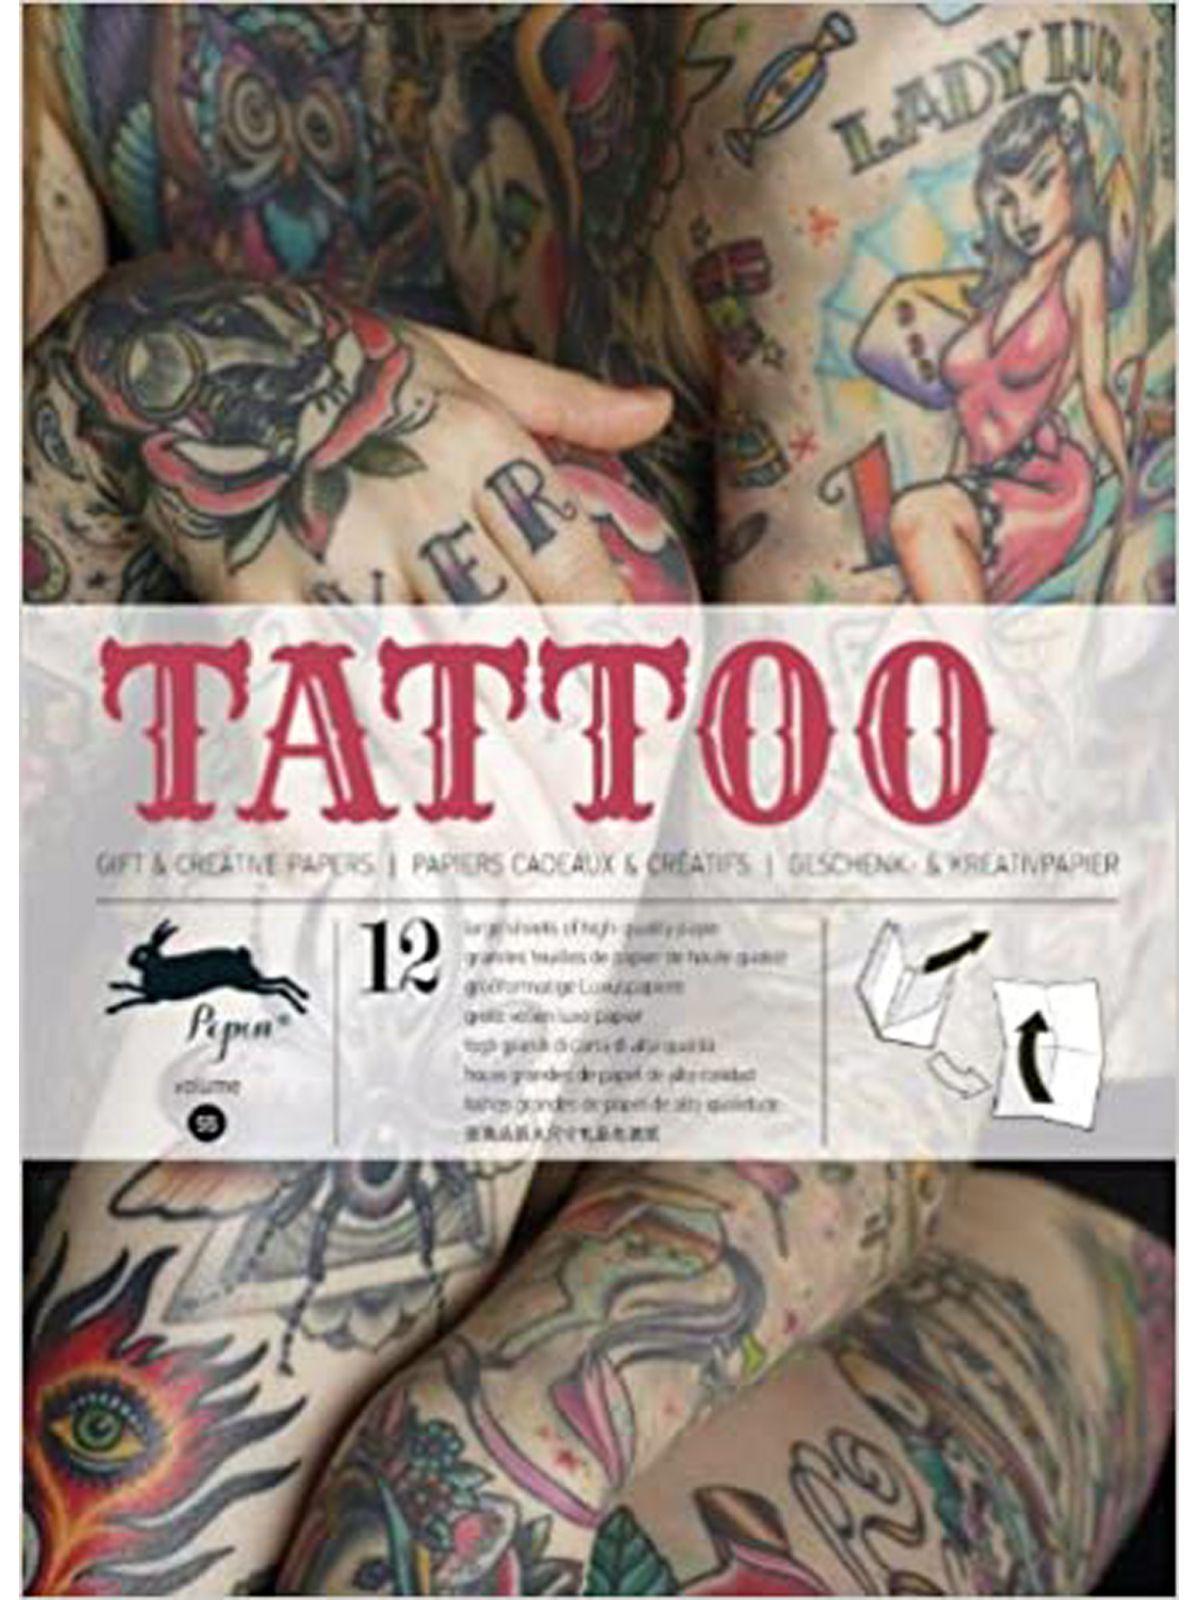 TATTOO: GIFT & CREATIVE PAPERS